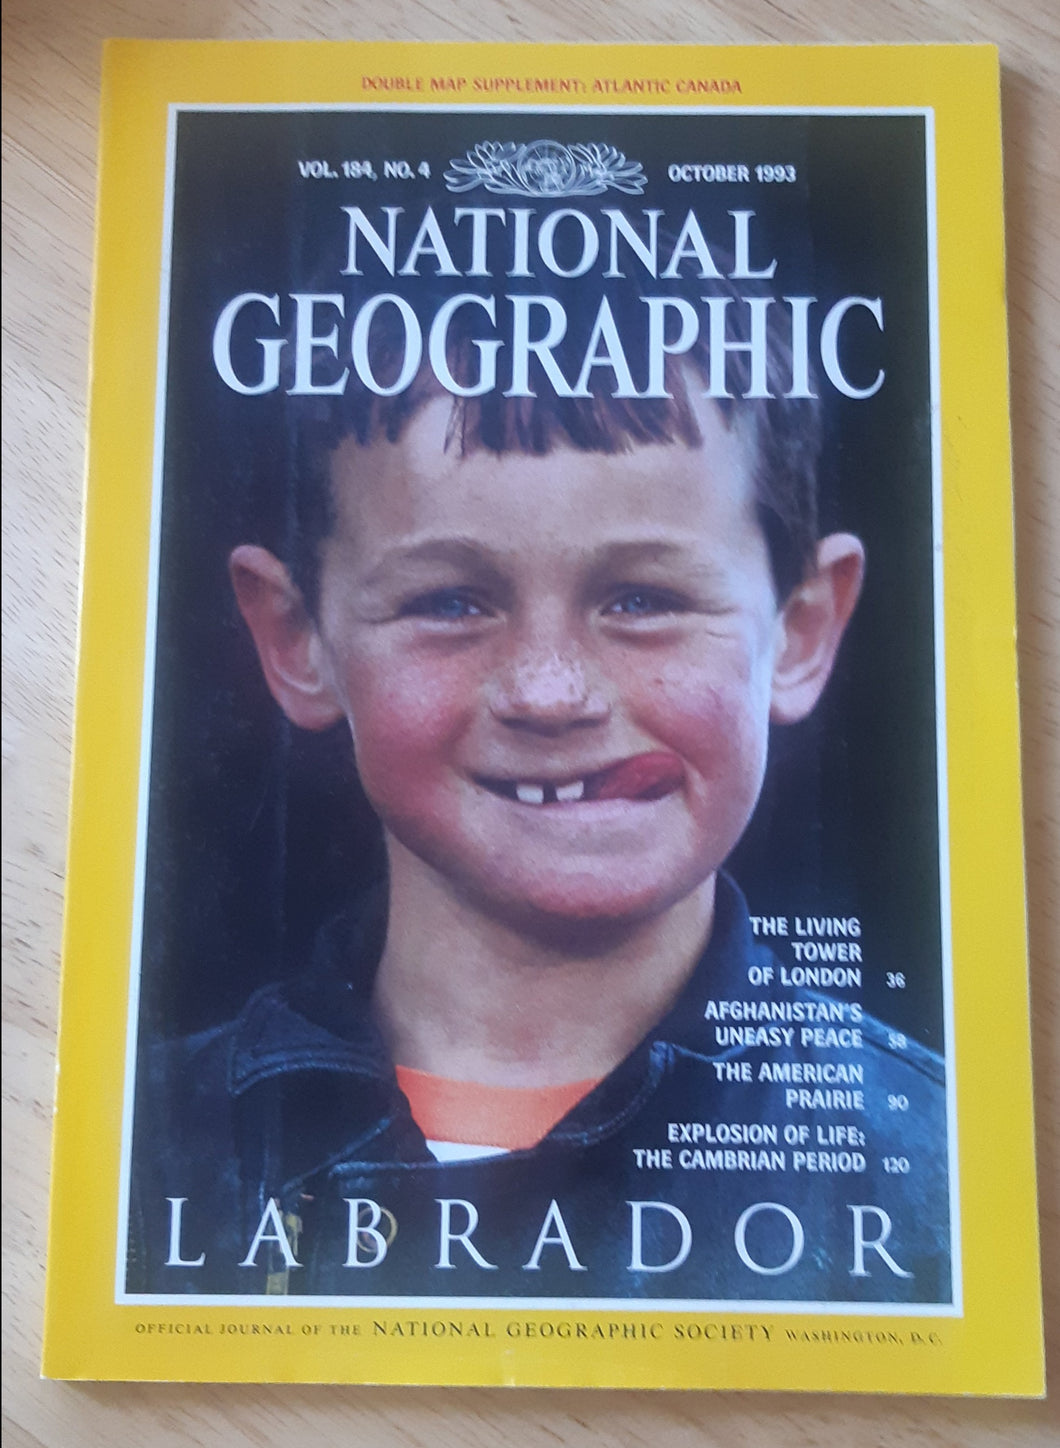 National Geographic - October 1993 (Vol. 184, No. 4)